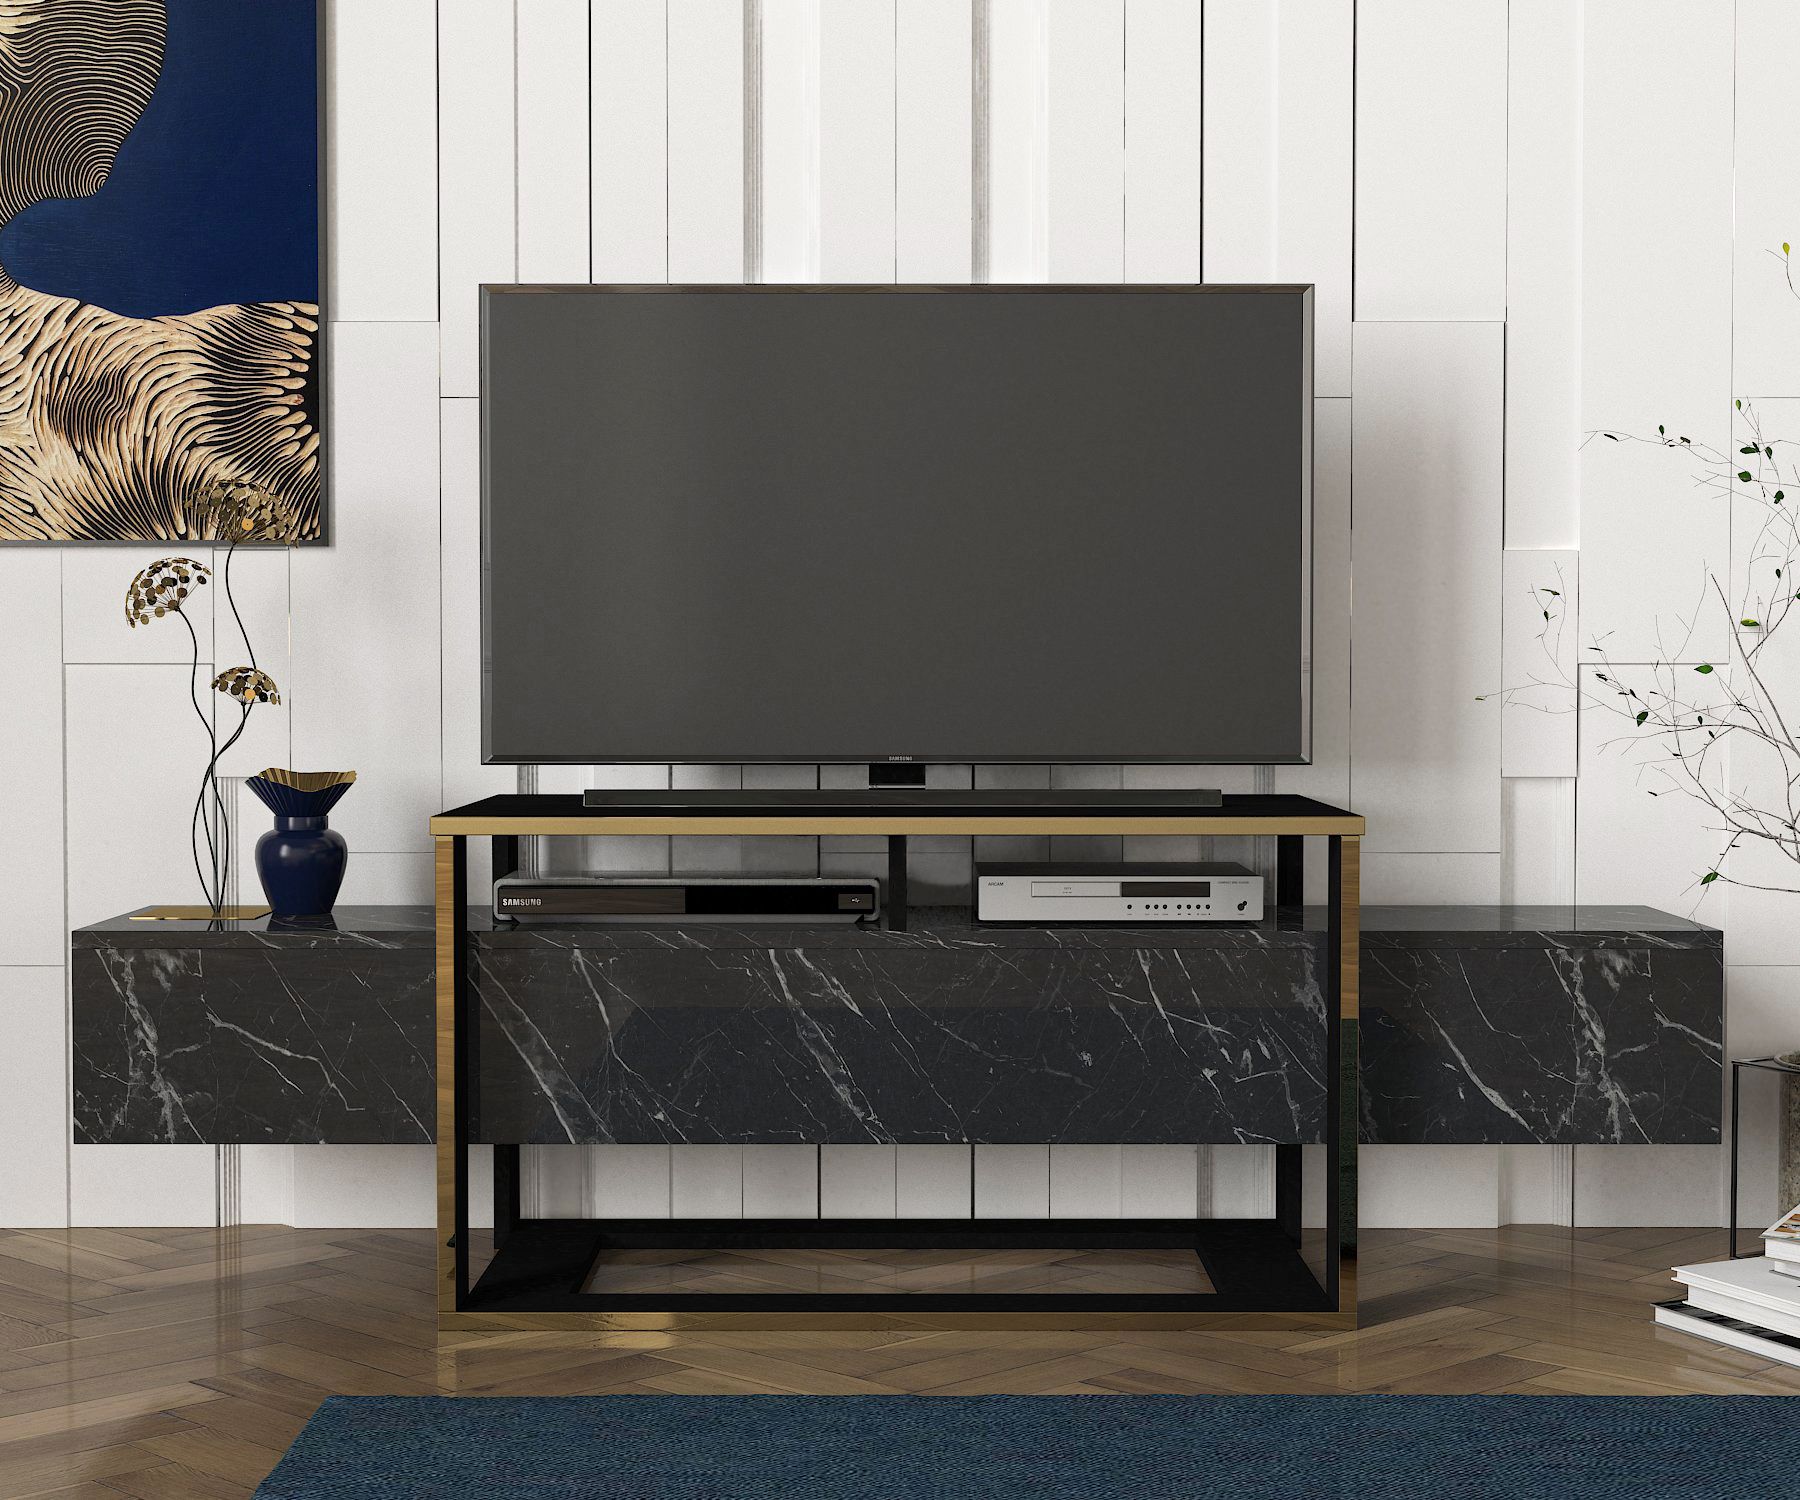 Sayre Bianco Unique Tv Stand, Black Marble Shelf Design Intended For Unusual Tv Stands (View 11 of 15)